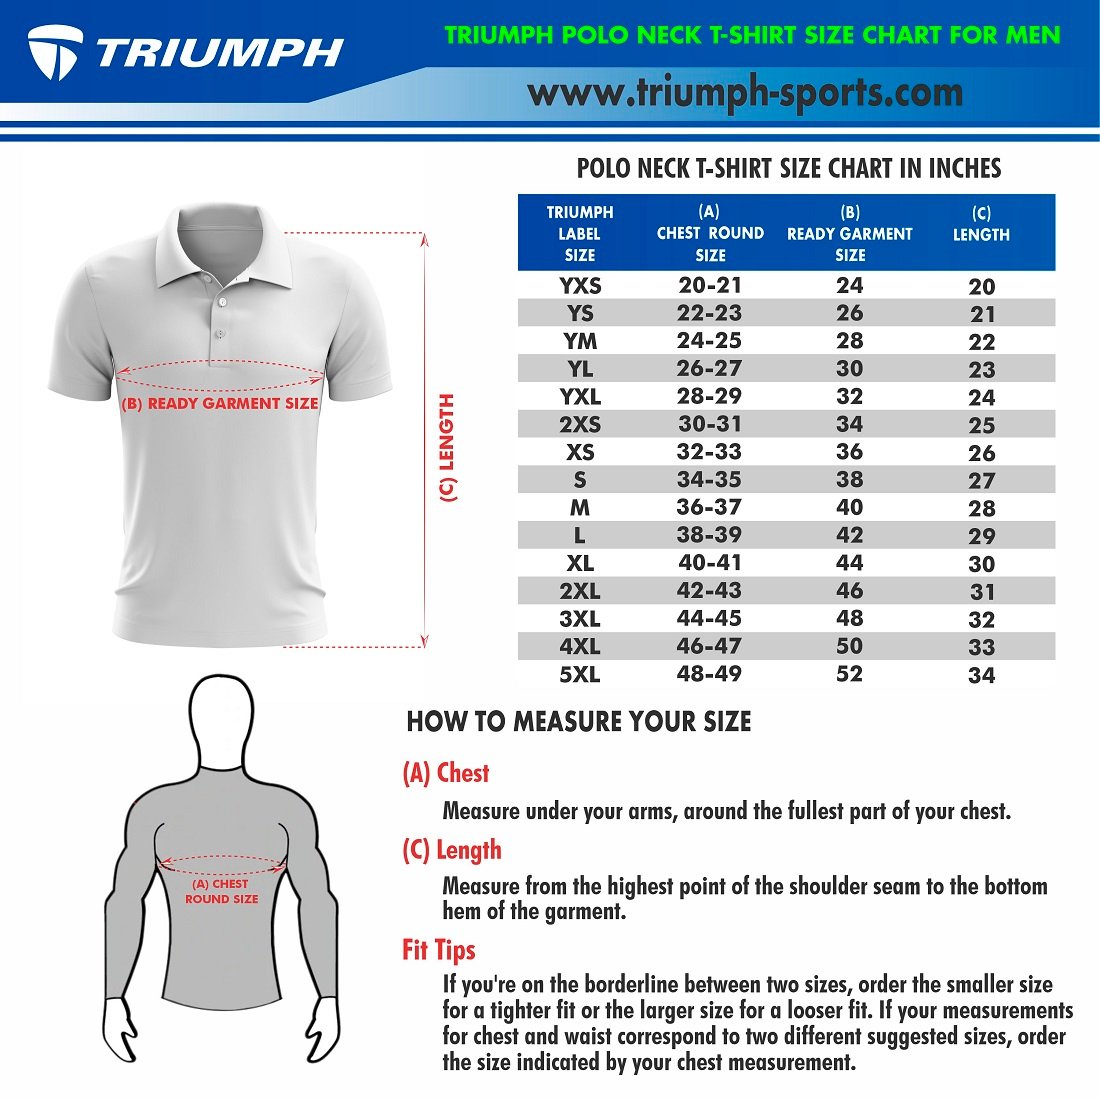 Regular Fit Men's Polo Neck T-shirts Size Chart